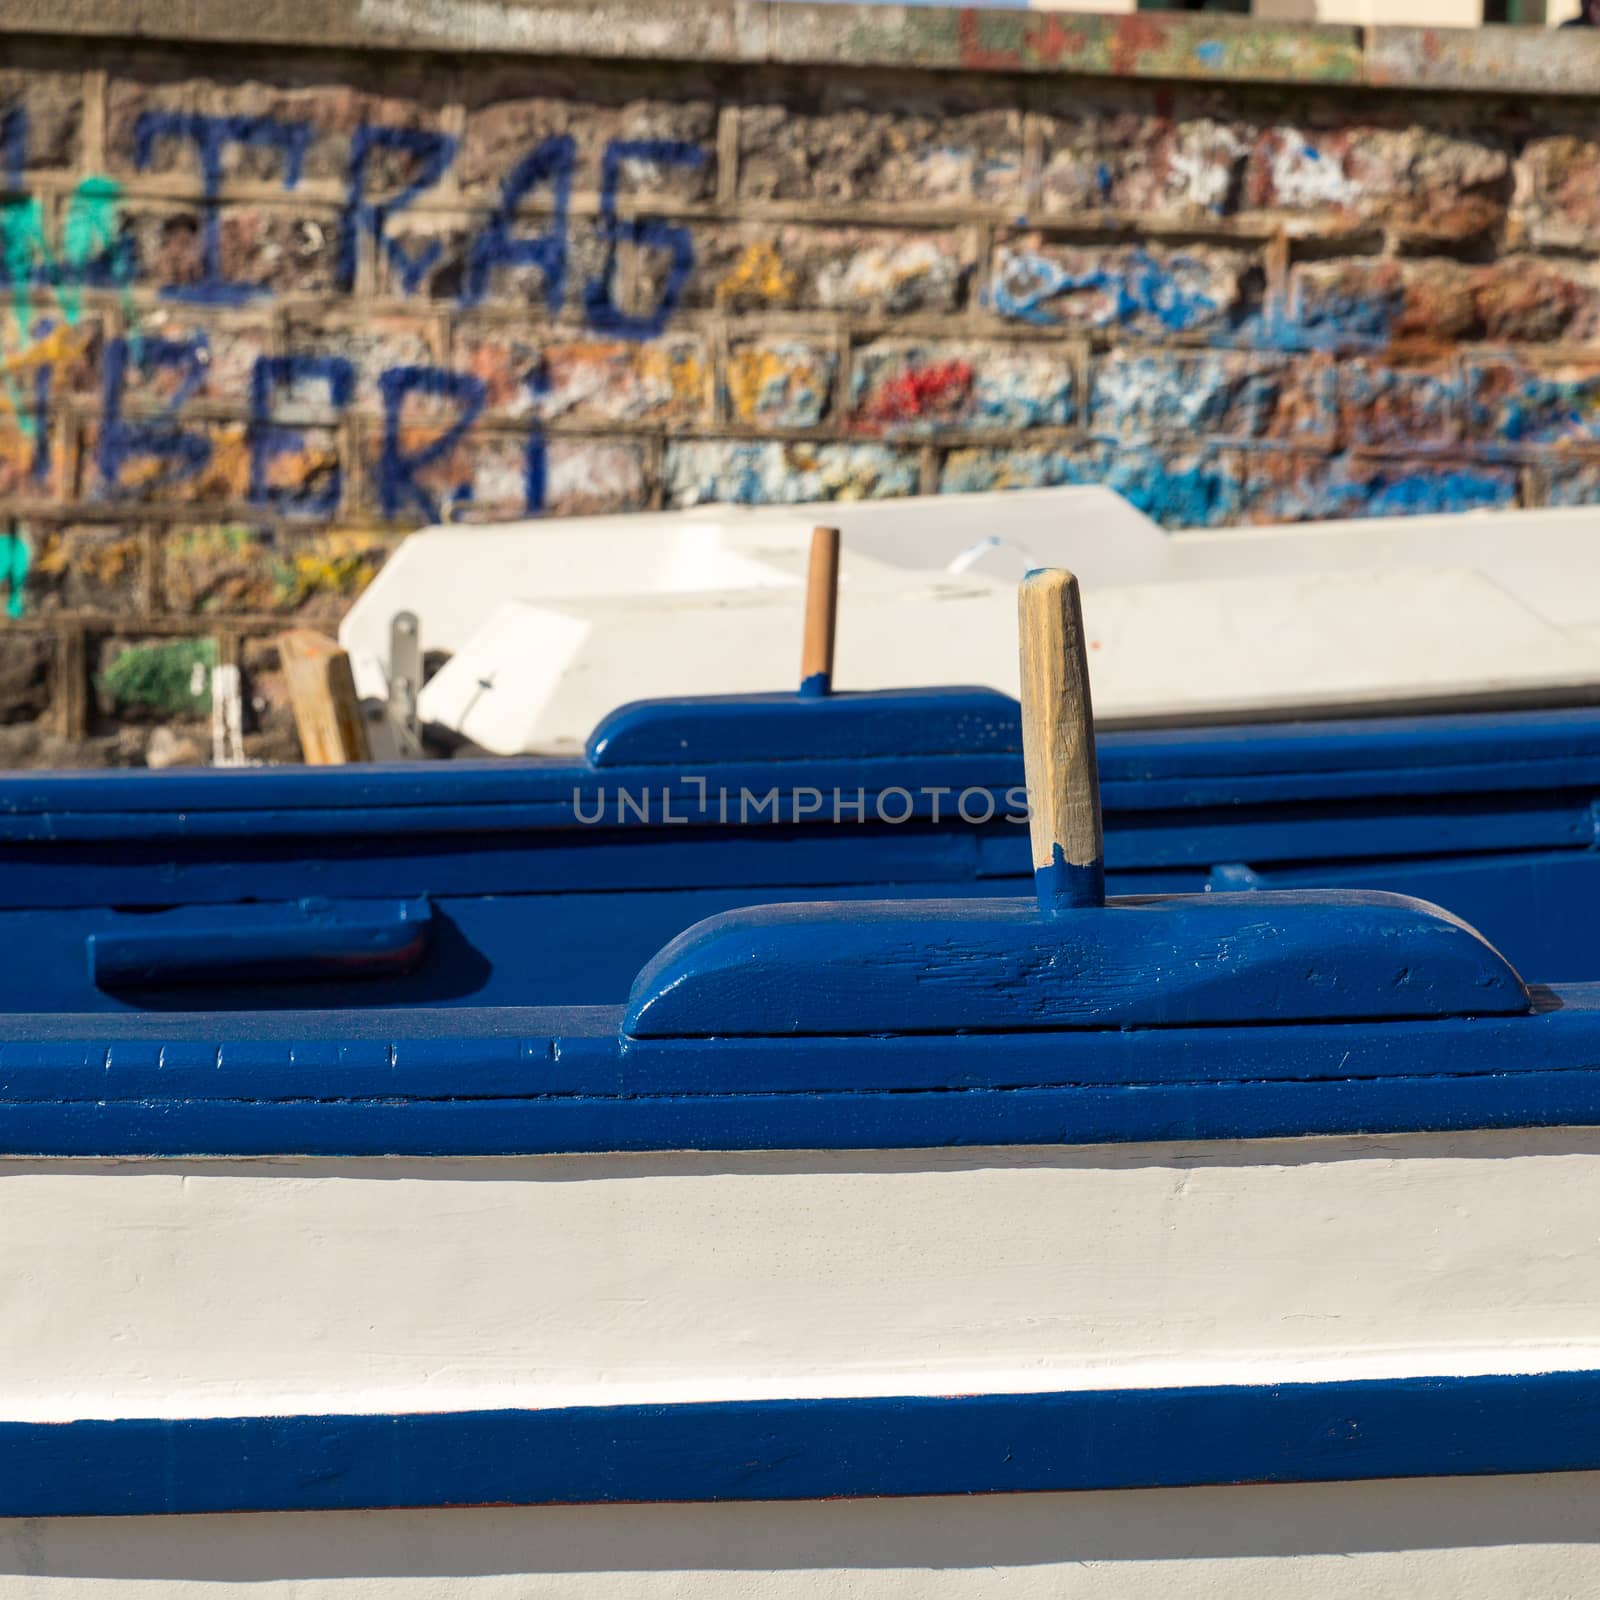 Small traditional fishing boat, made of wood, coloured, painted, Sicily